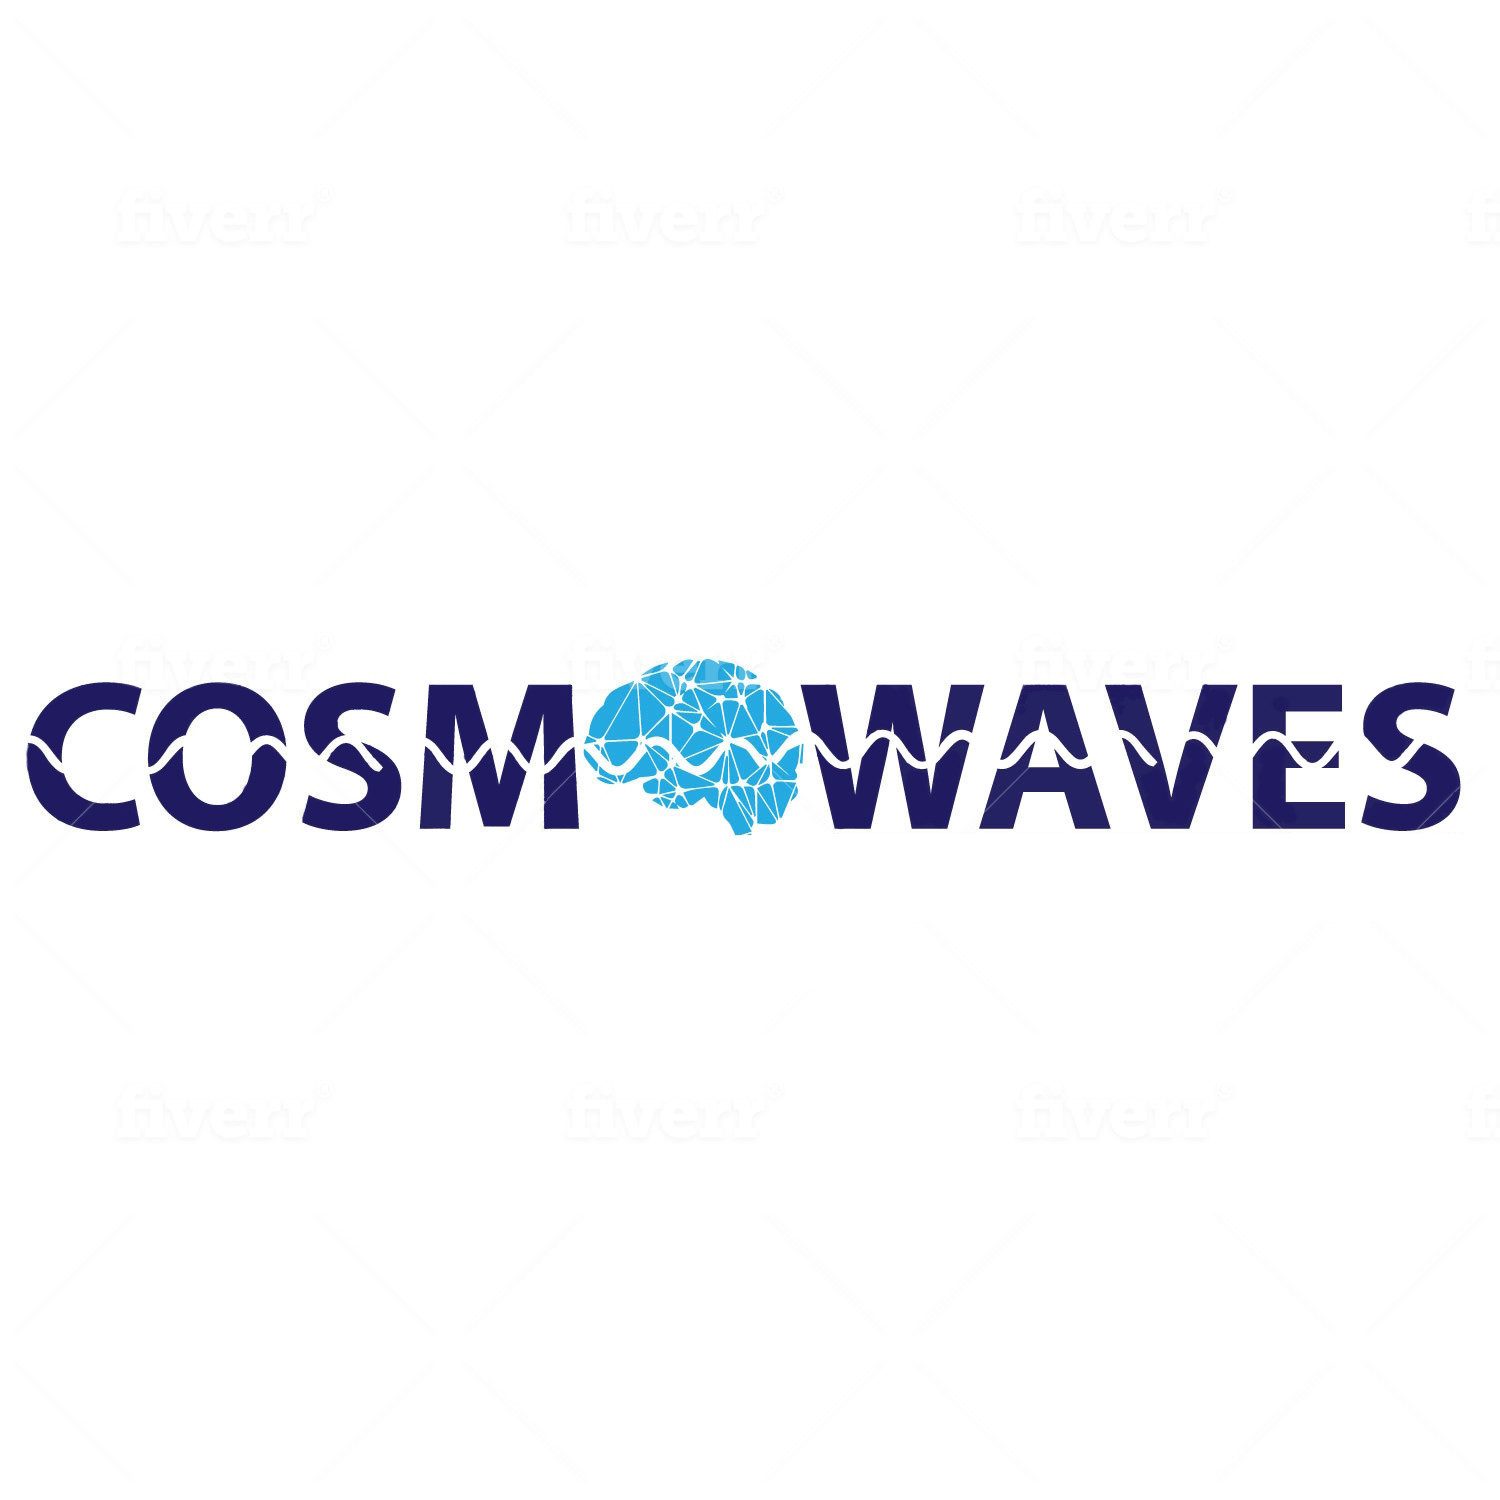 Cosmowaves